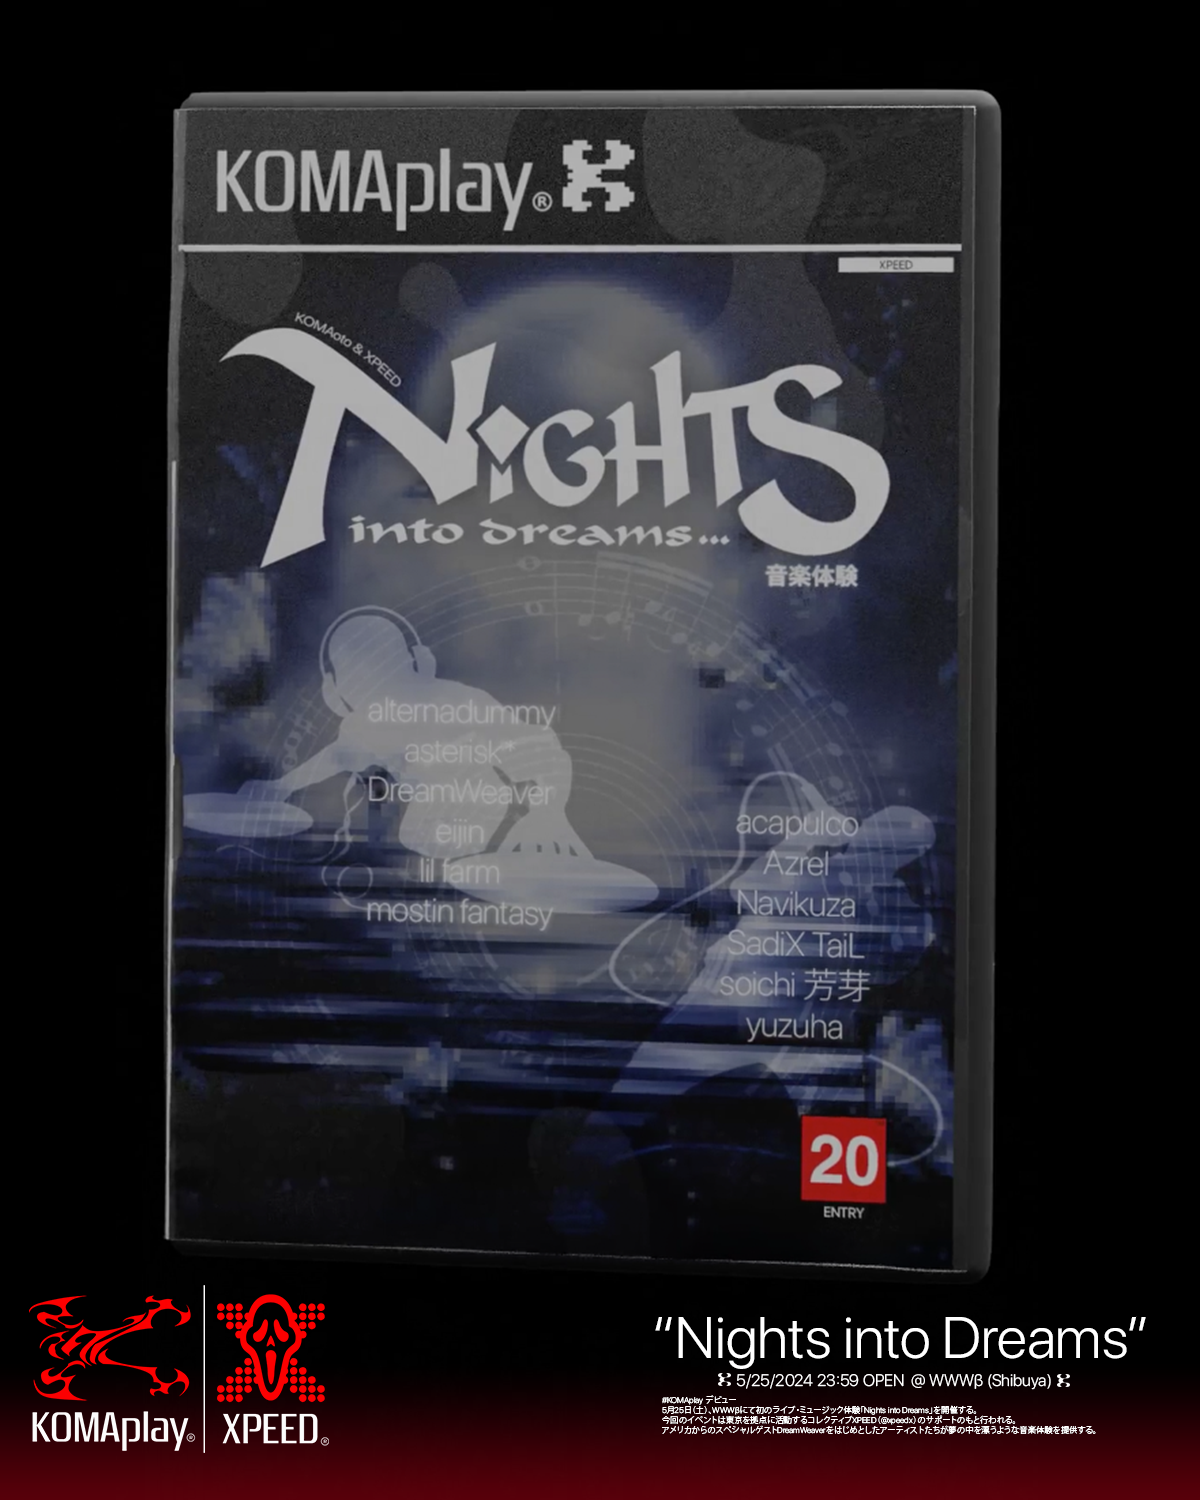 KOMAplay: Nights into Dreams supported by Xpeed